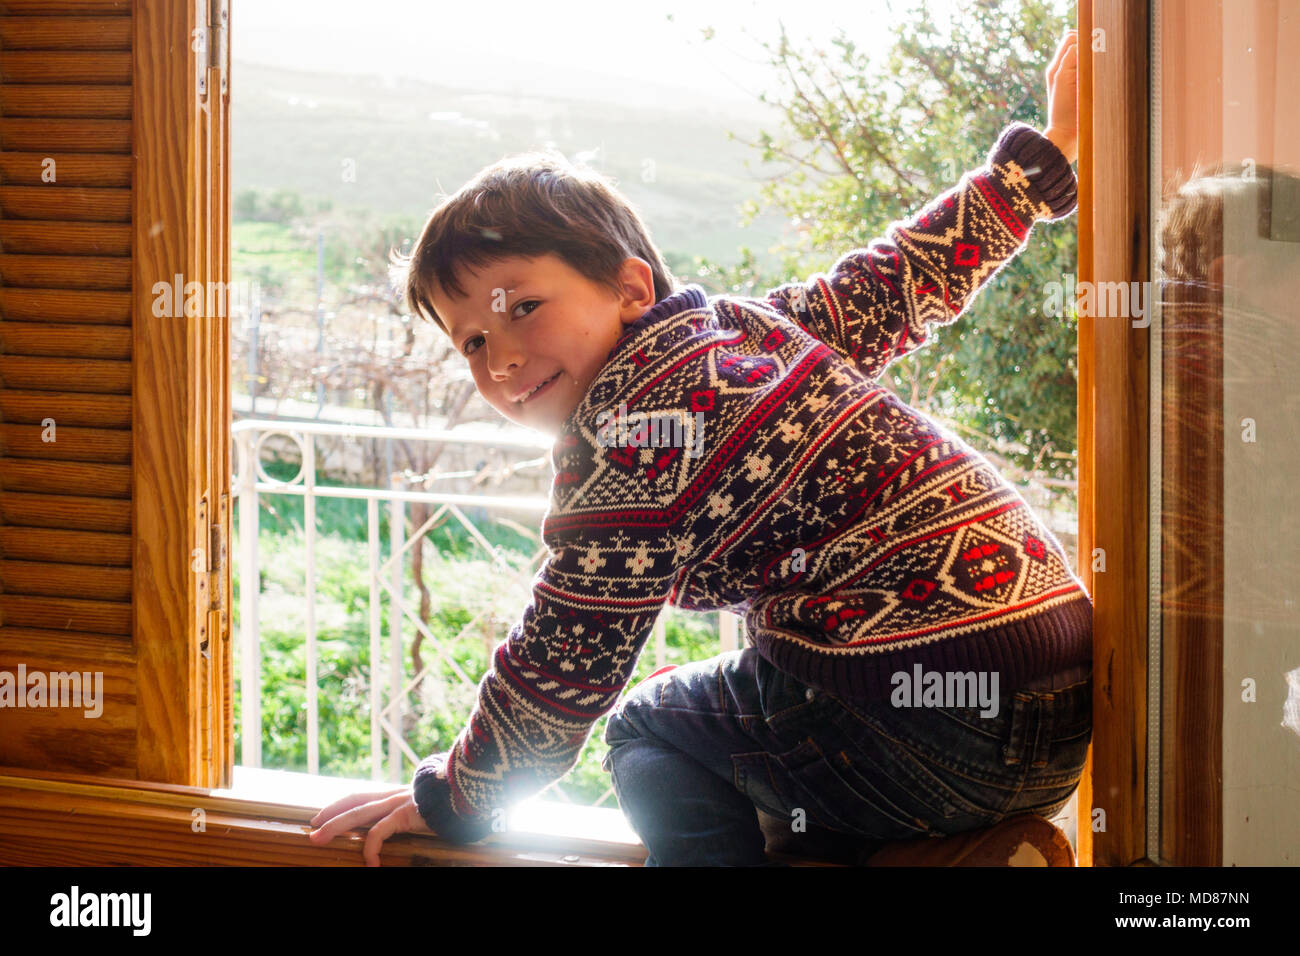 Boy looking at camera while sitting on the window, Greece Stock Photo